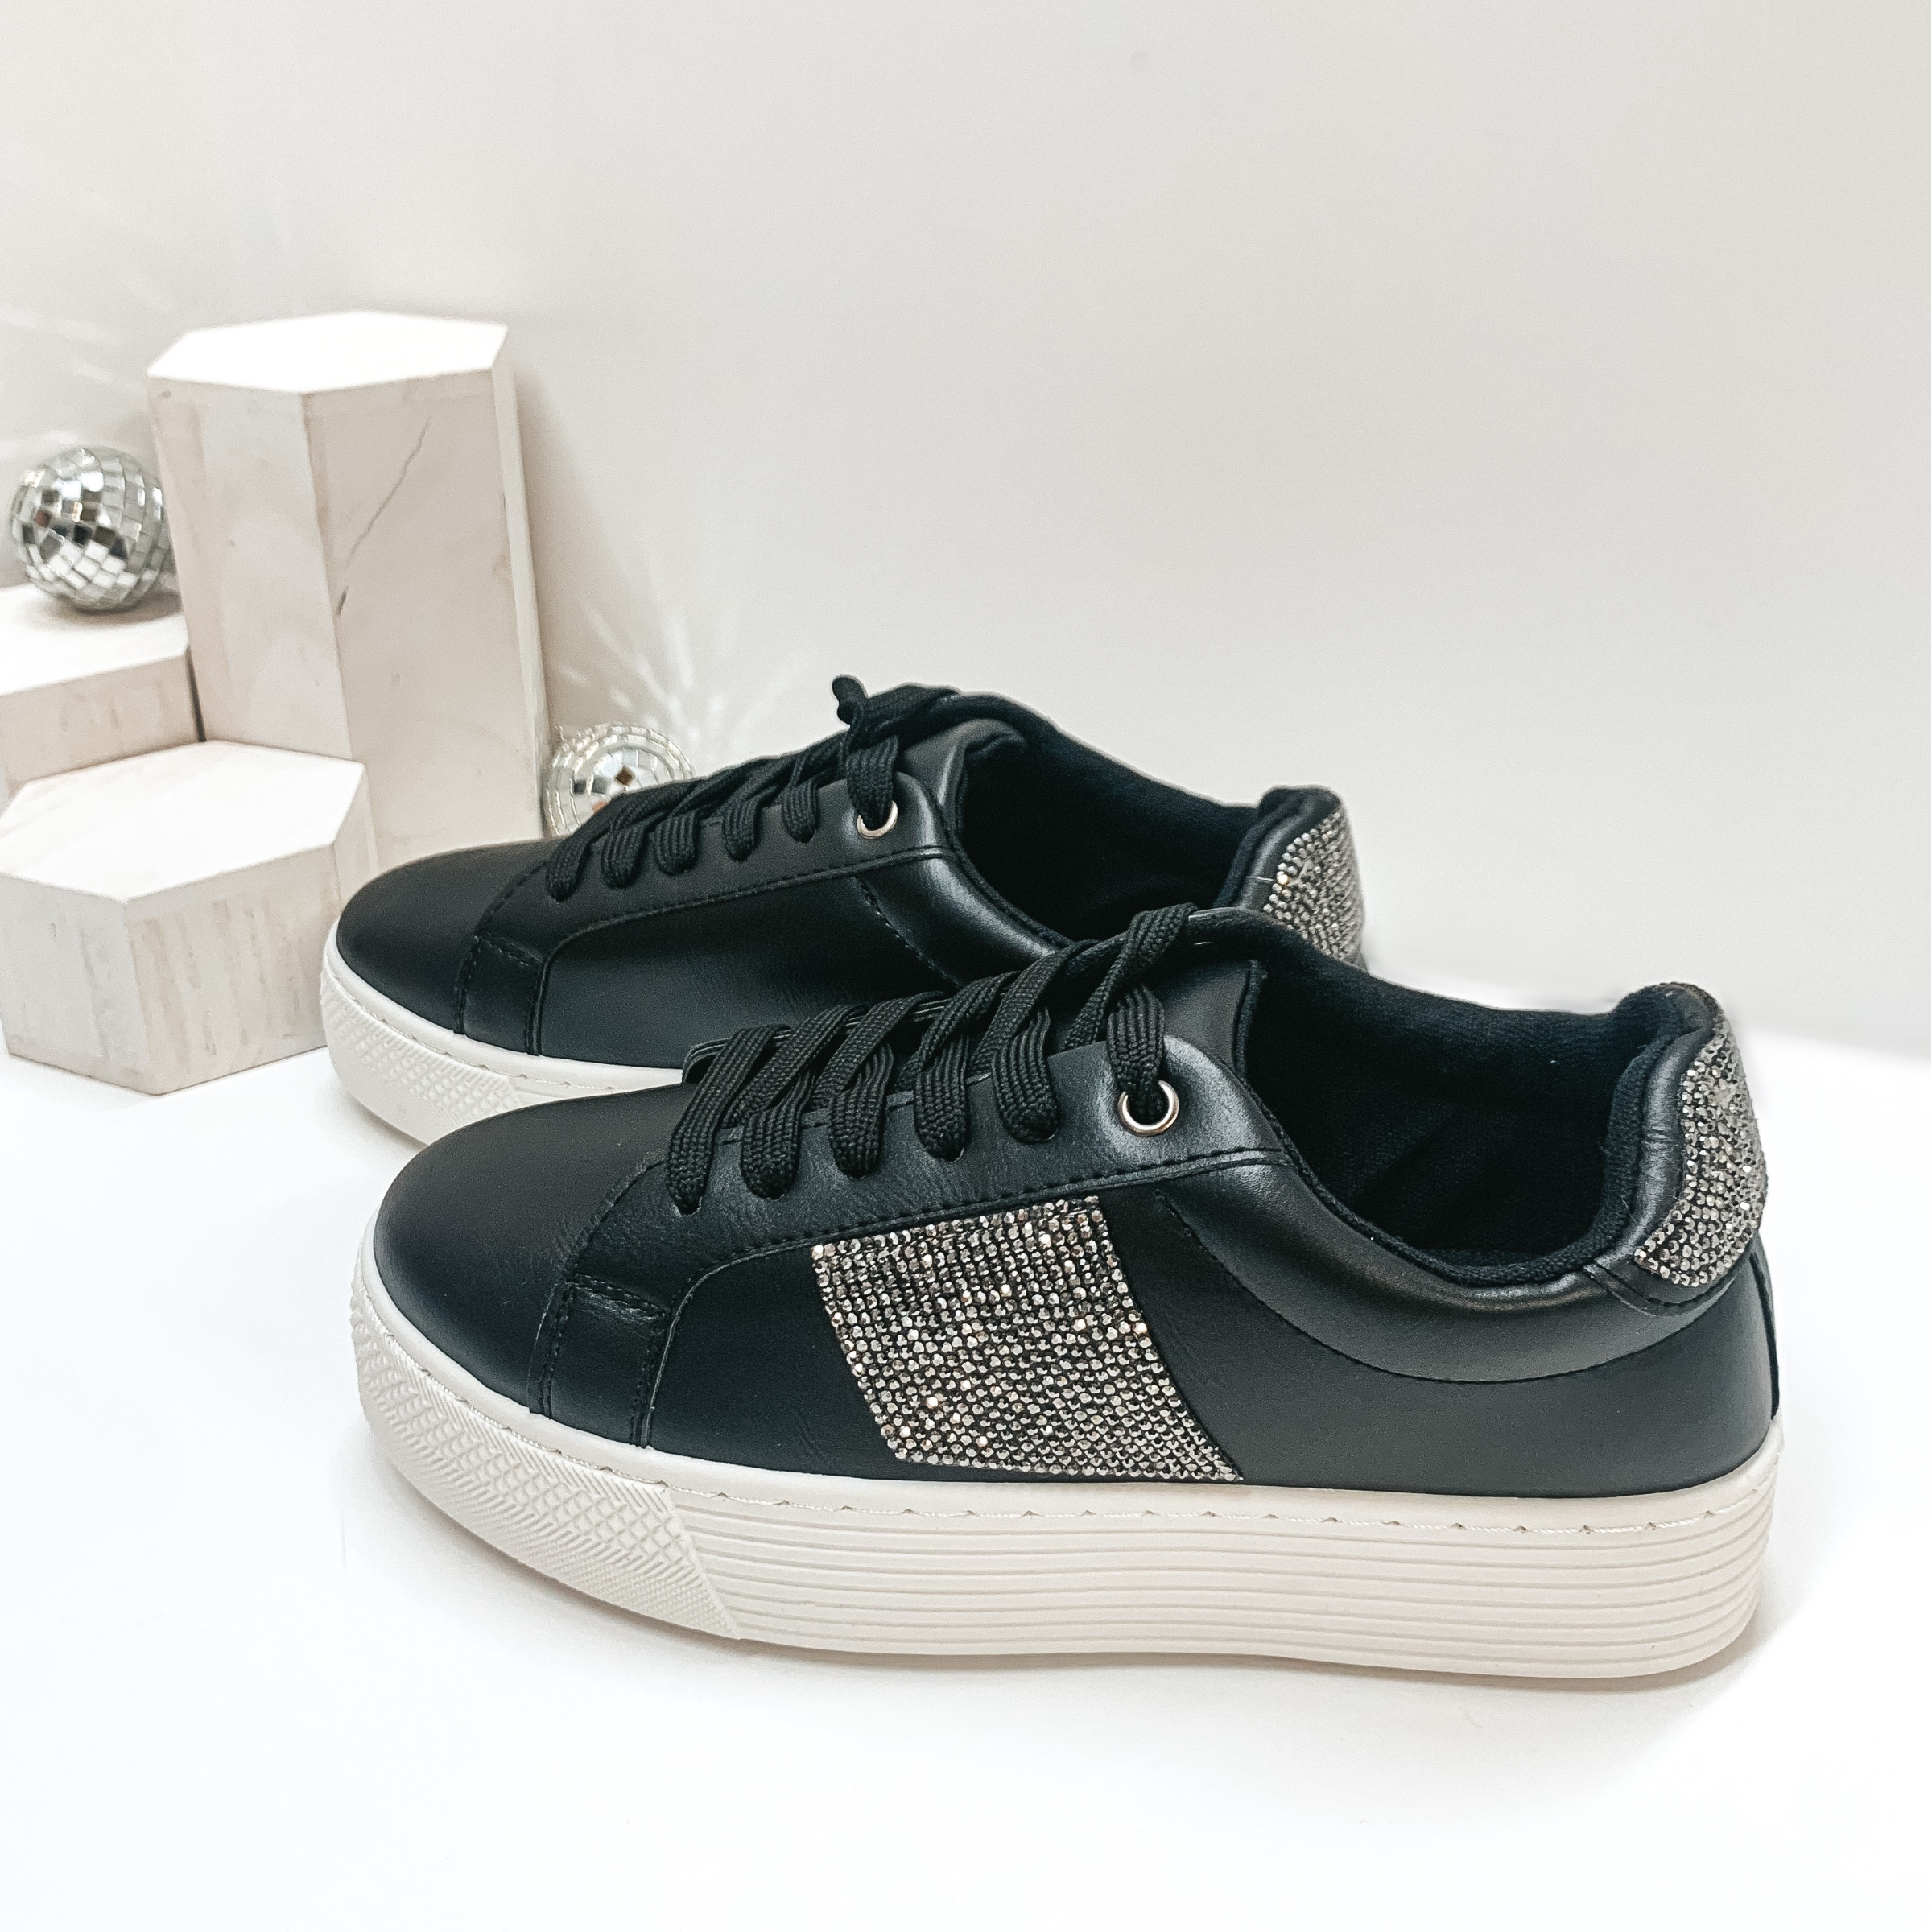 Shining Chic Lace Up Crystal Embellished Platform Sneakers in Black - Giddy Up Glamour Boutique